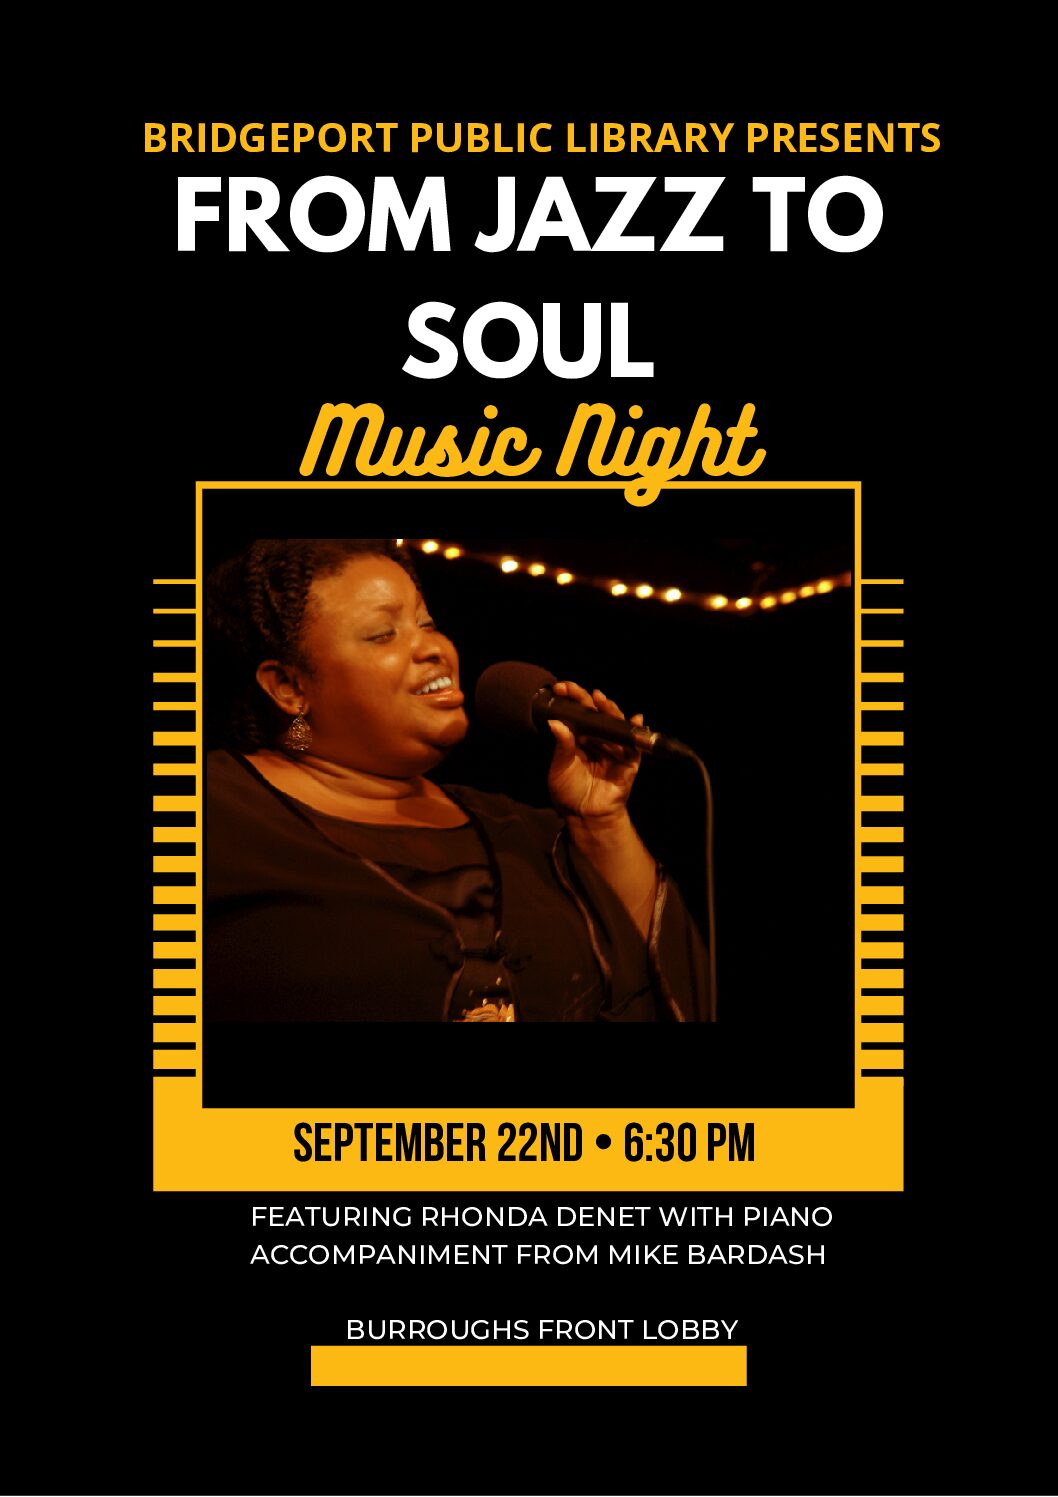 From Jazz to Soul with Rhonda Denet